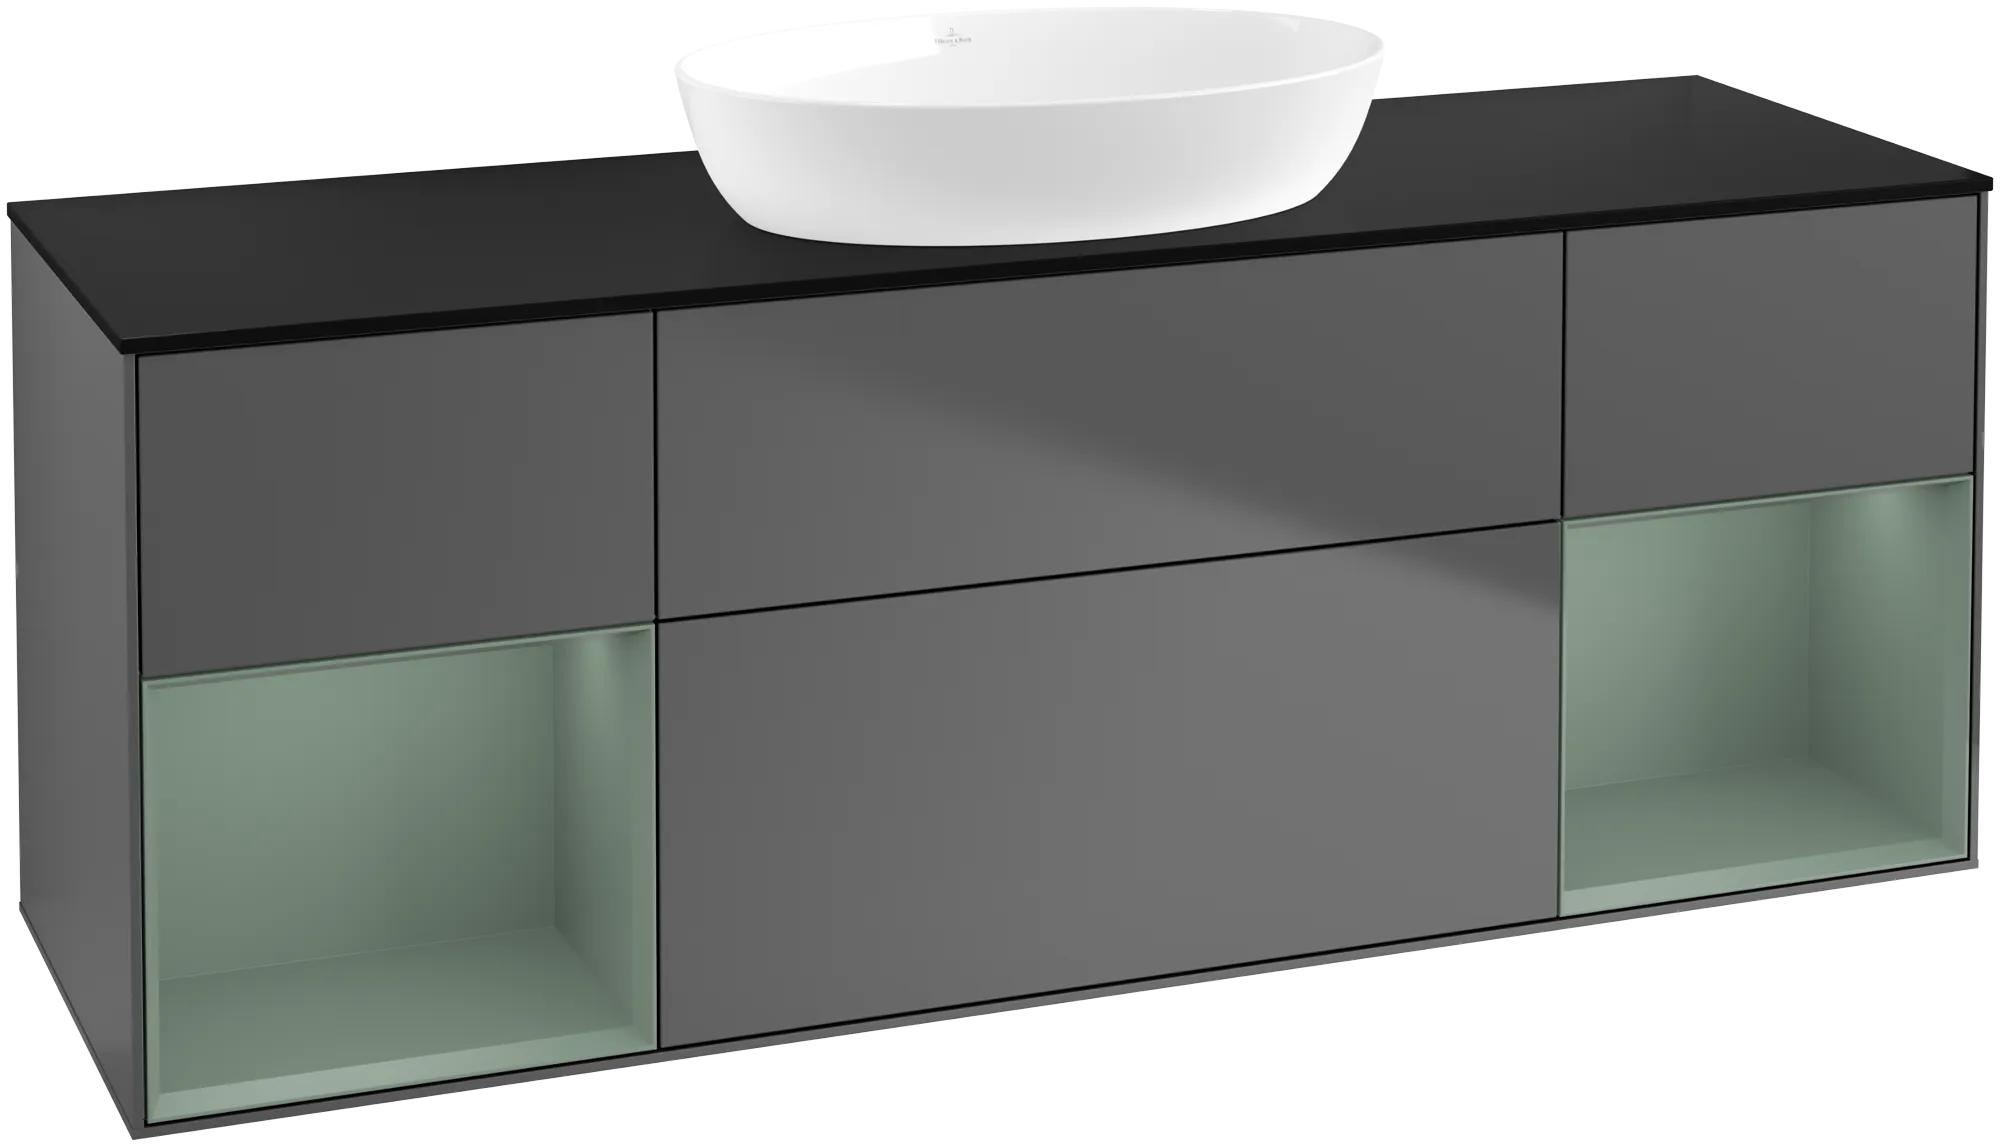 Picture of VILLEROY BOCH Finion Vanity unit, with lighting, 4 pull-out compartments, 1600 x 603 x 501 mm, Anthracite Matt Lacquer / Olive Matt Lacquer / Glass Black Matt #GD02GMGK